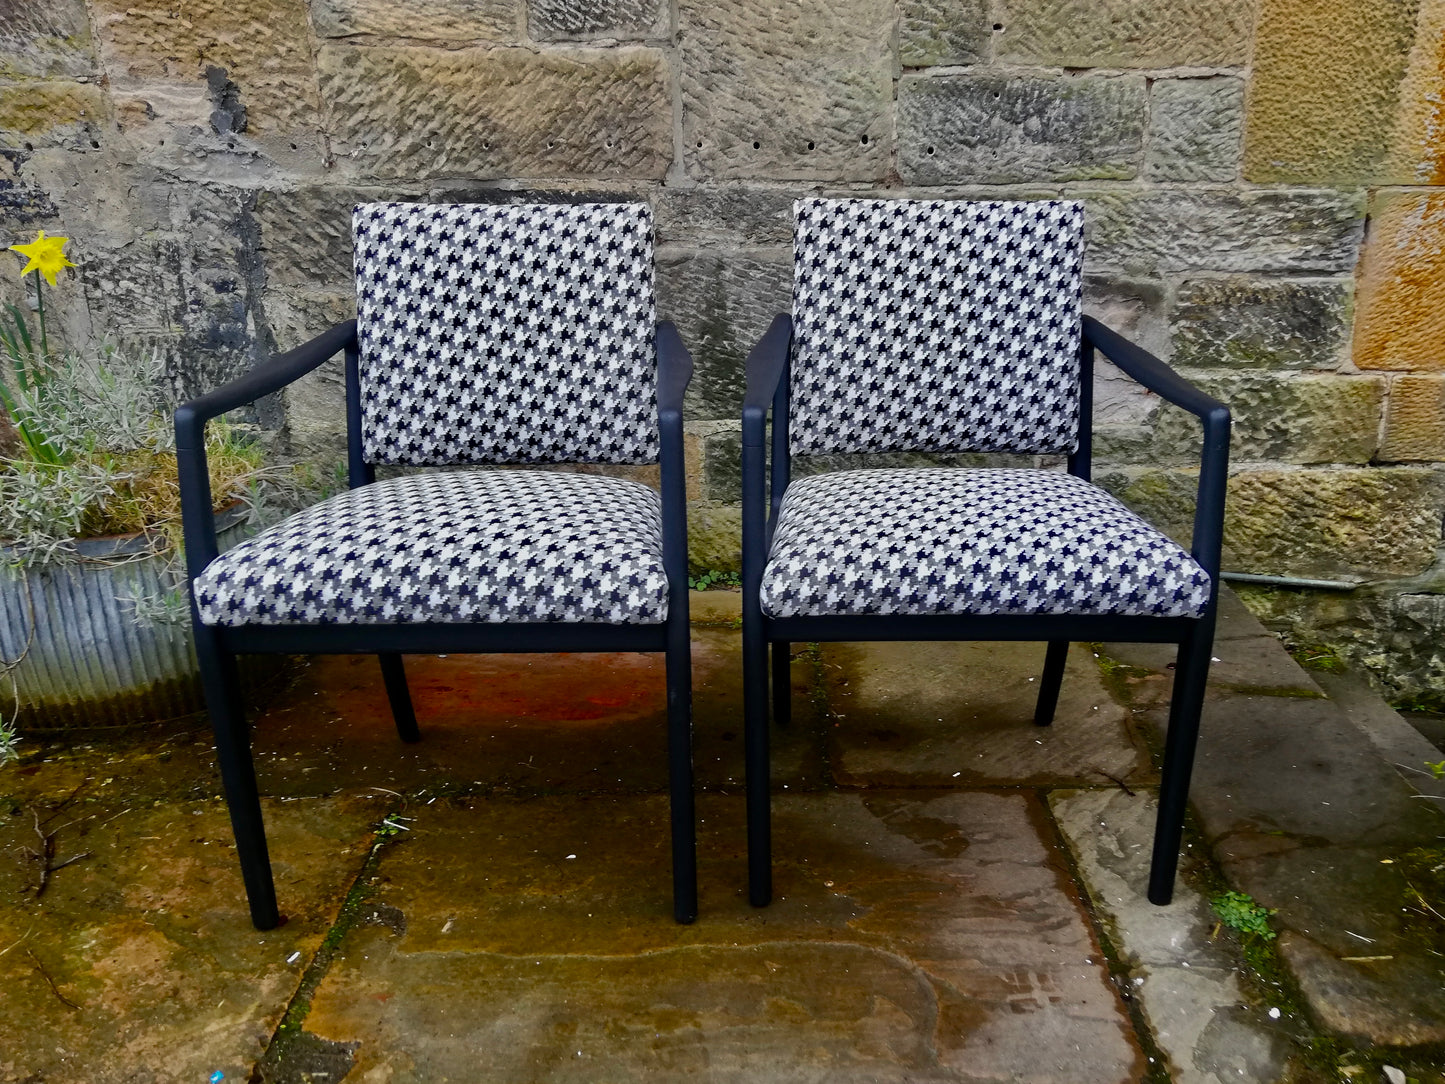 Commission for Lindsay Norton 2 chairs refurbed